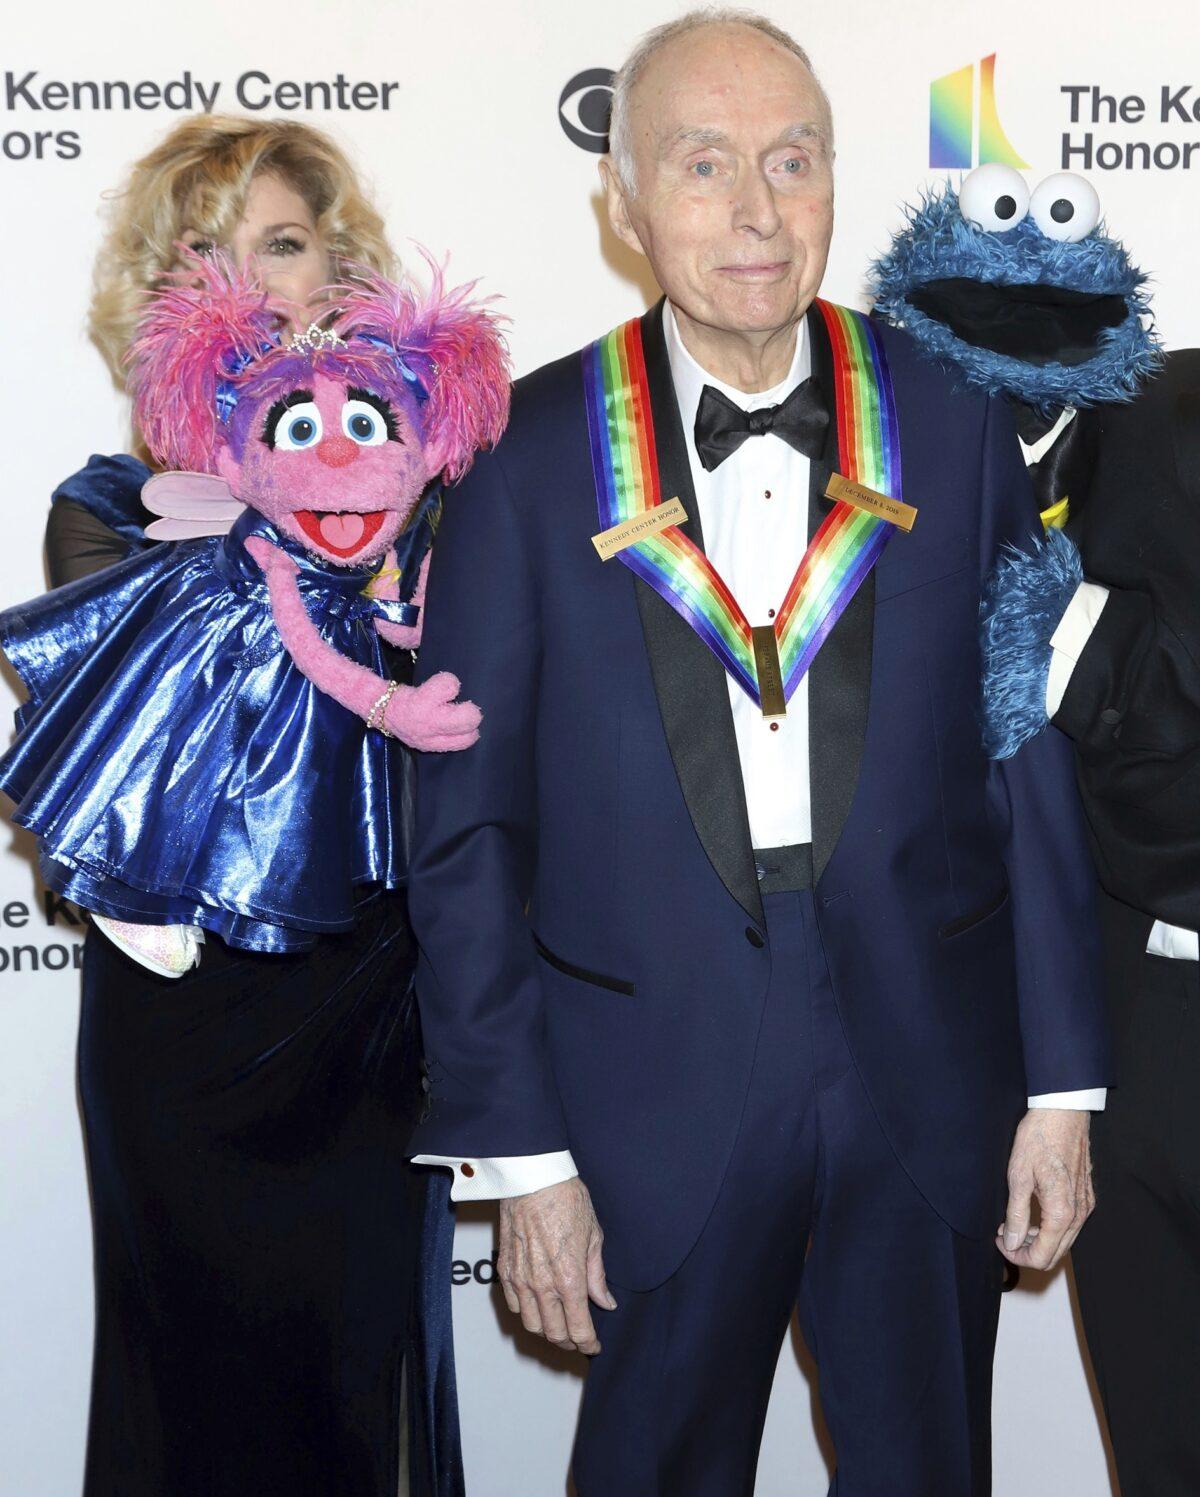 Honoree Lloyd Morrisett appears with muppet characters at the 42nd Annual Kennedy Center Honors at The Kennedy Center in Washington on Dec. 8, 2019. (Greg Allen/Invision/AP)